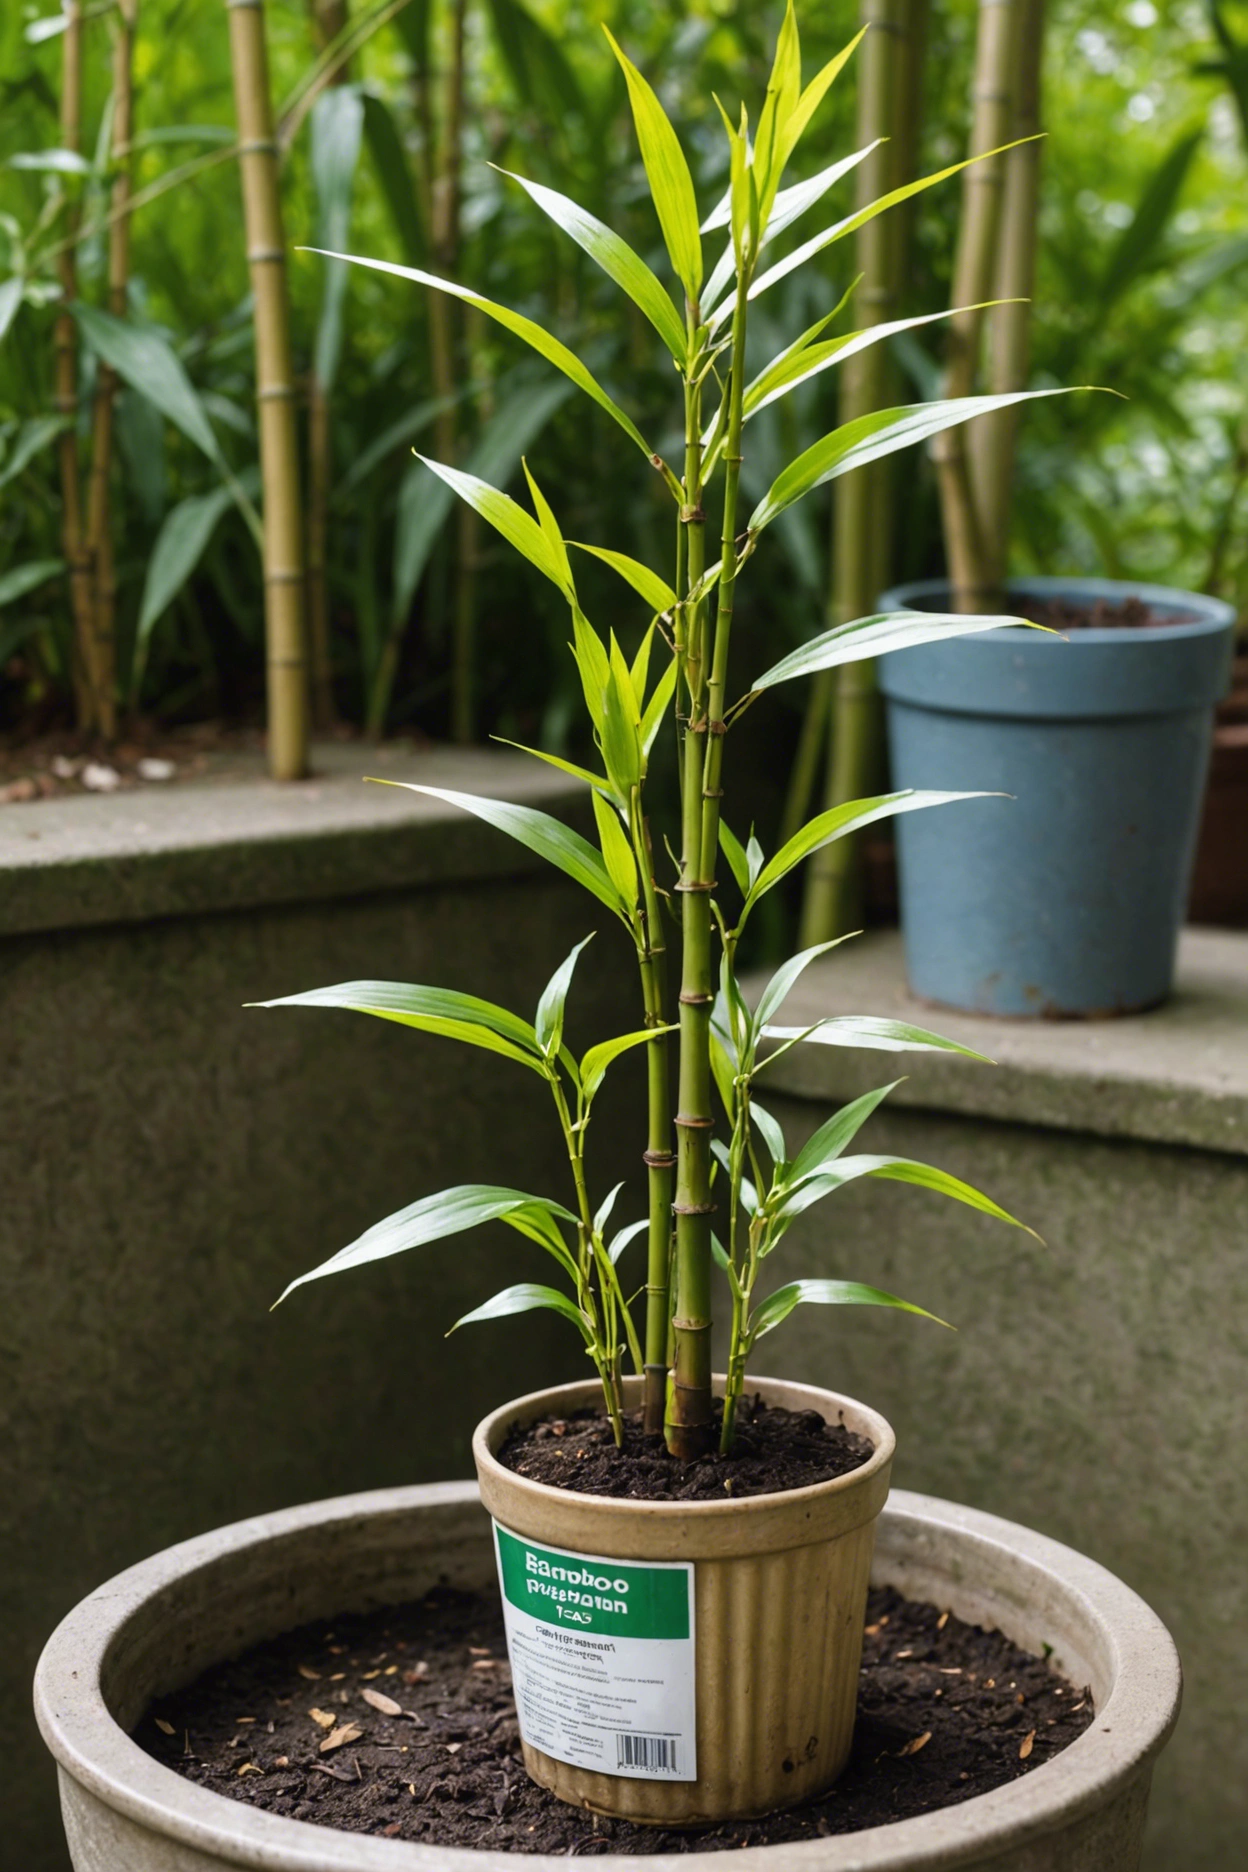 "Close-up of a potted bamboo plant with yellowing leaves outdoors, with a pH soil tester and bamboo fertilizer nearby."